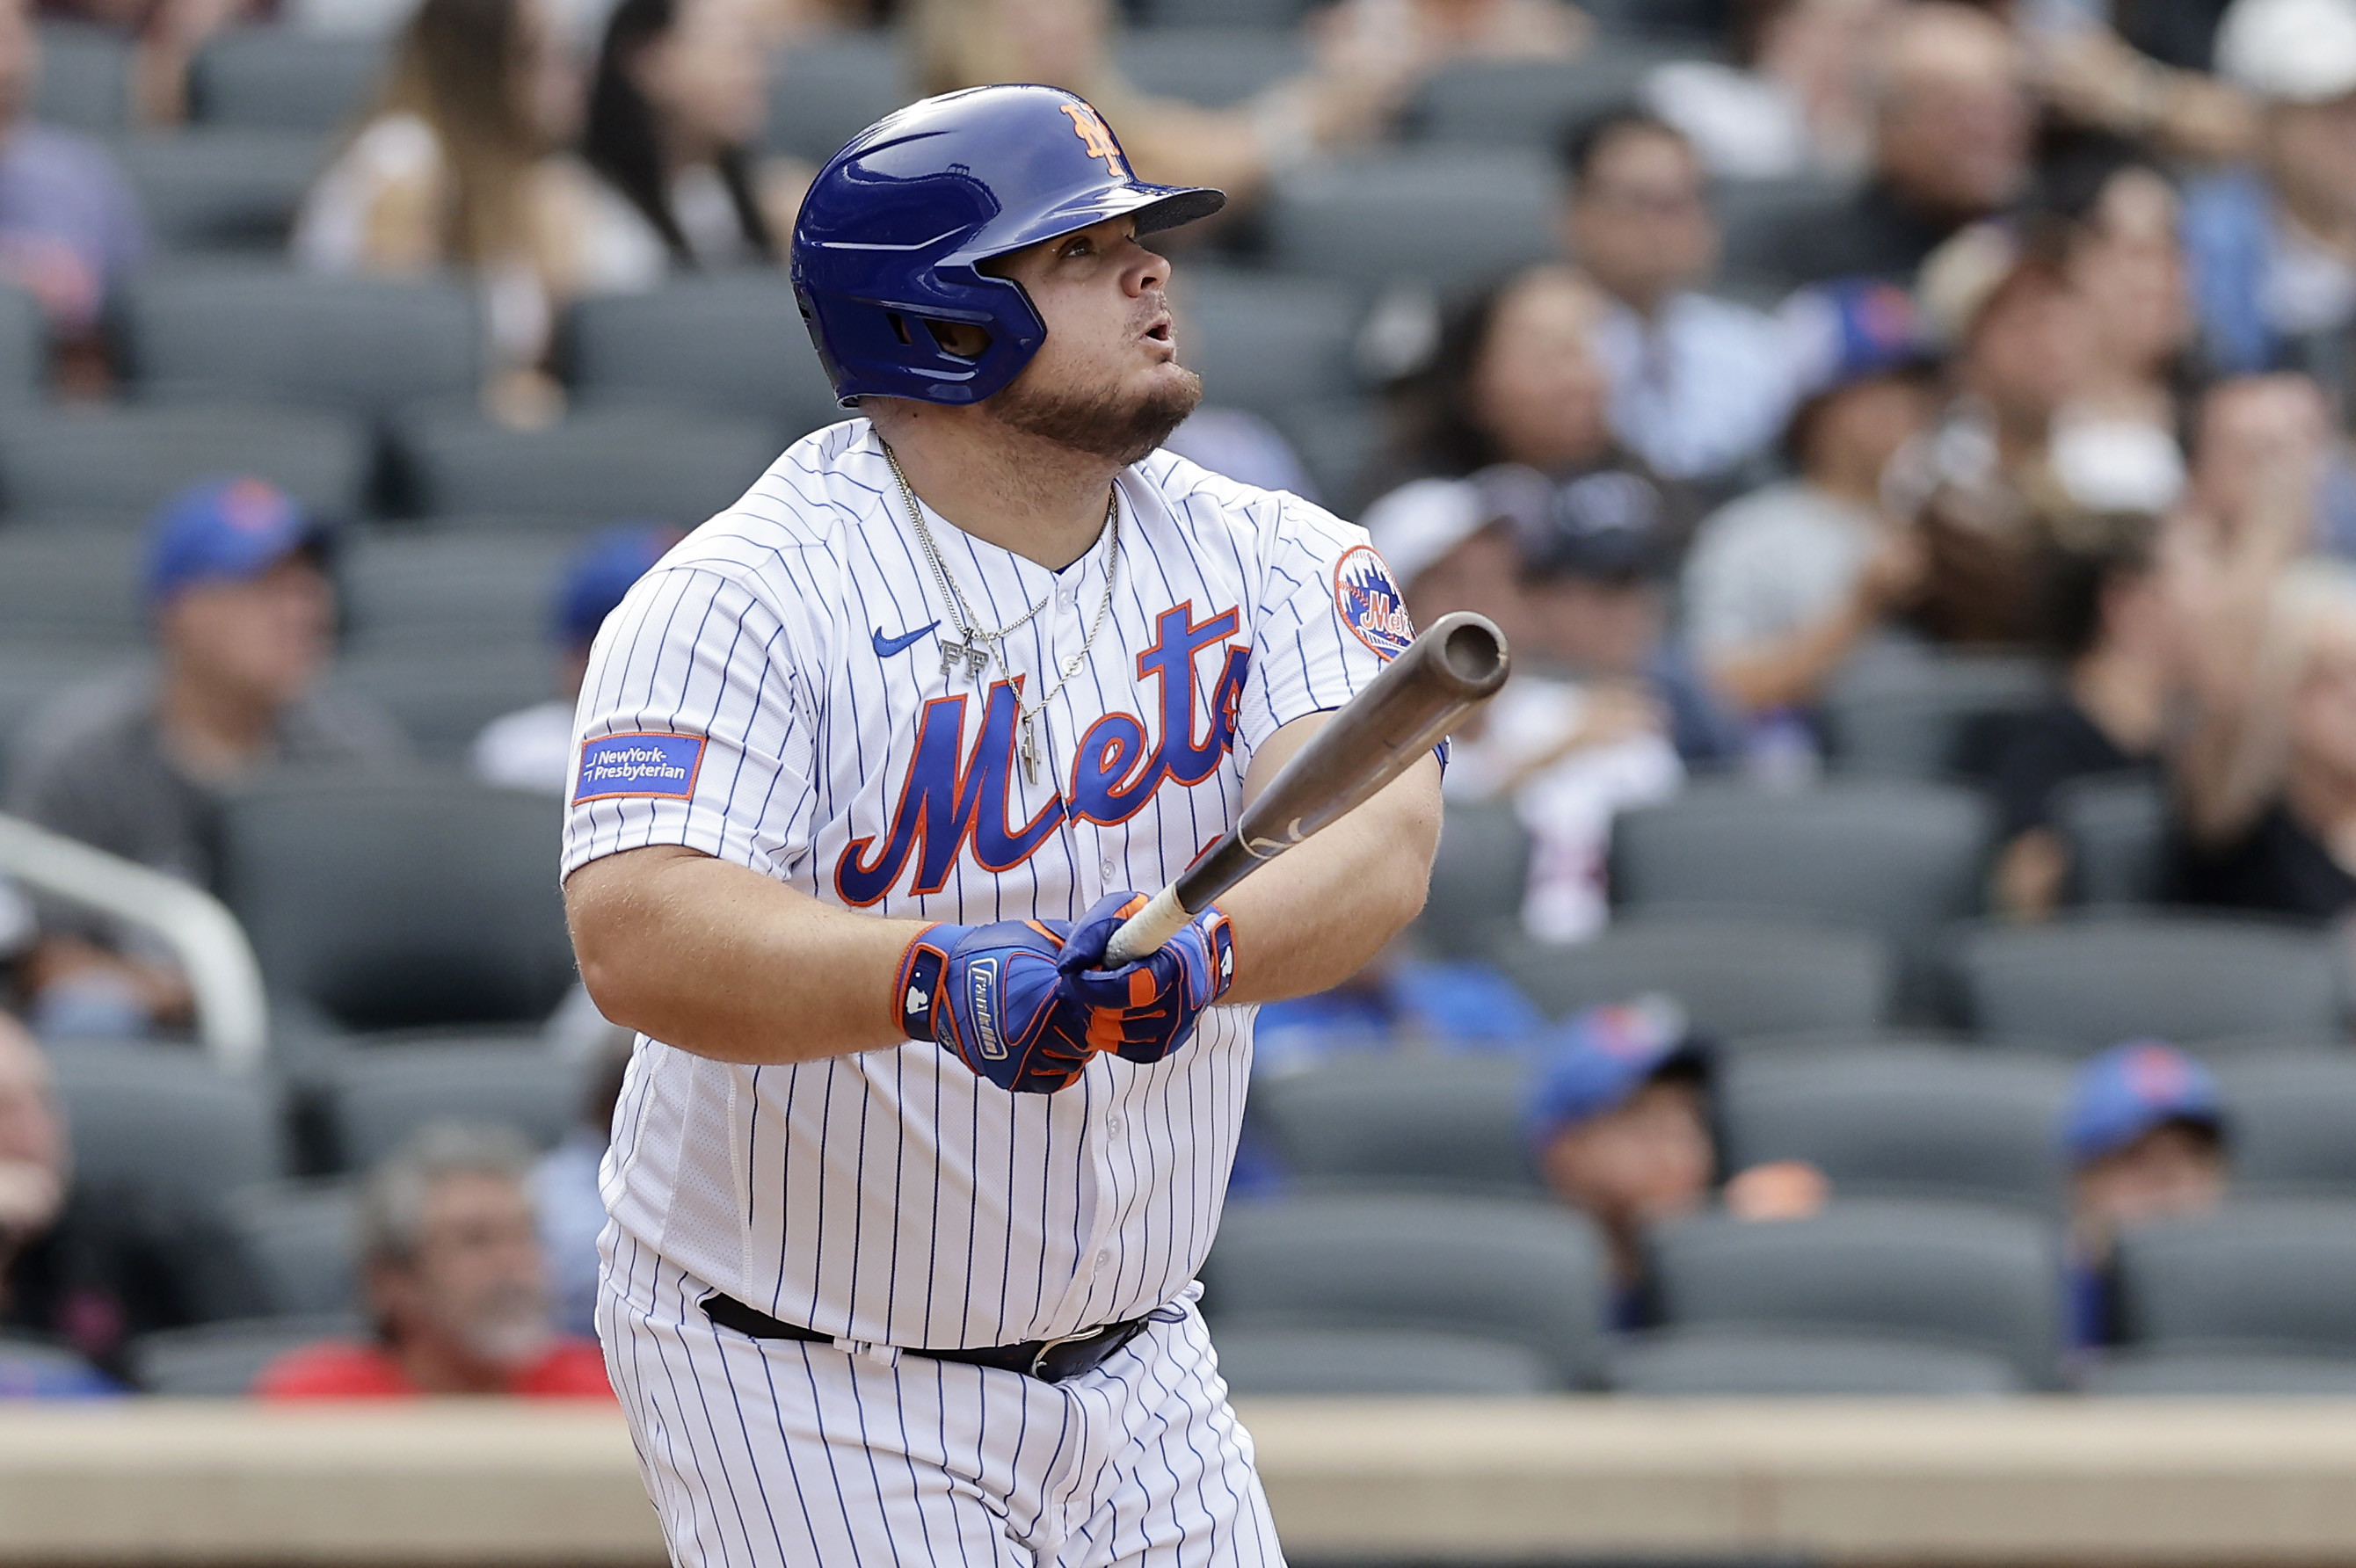 REPORT: Brewers acquire OF Mark Canha from Mets